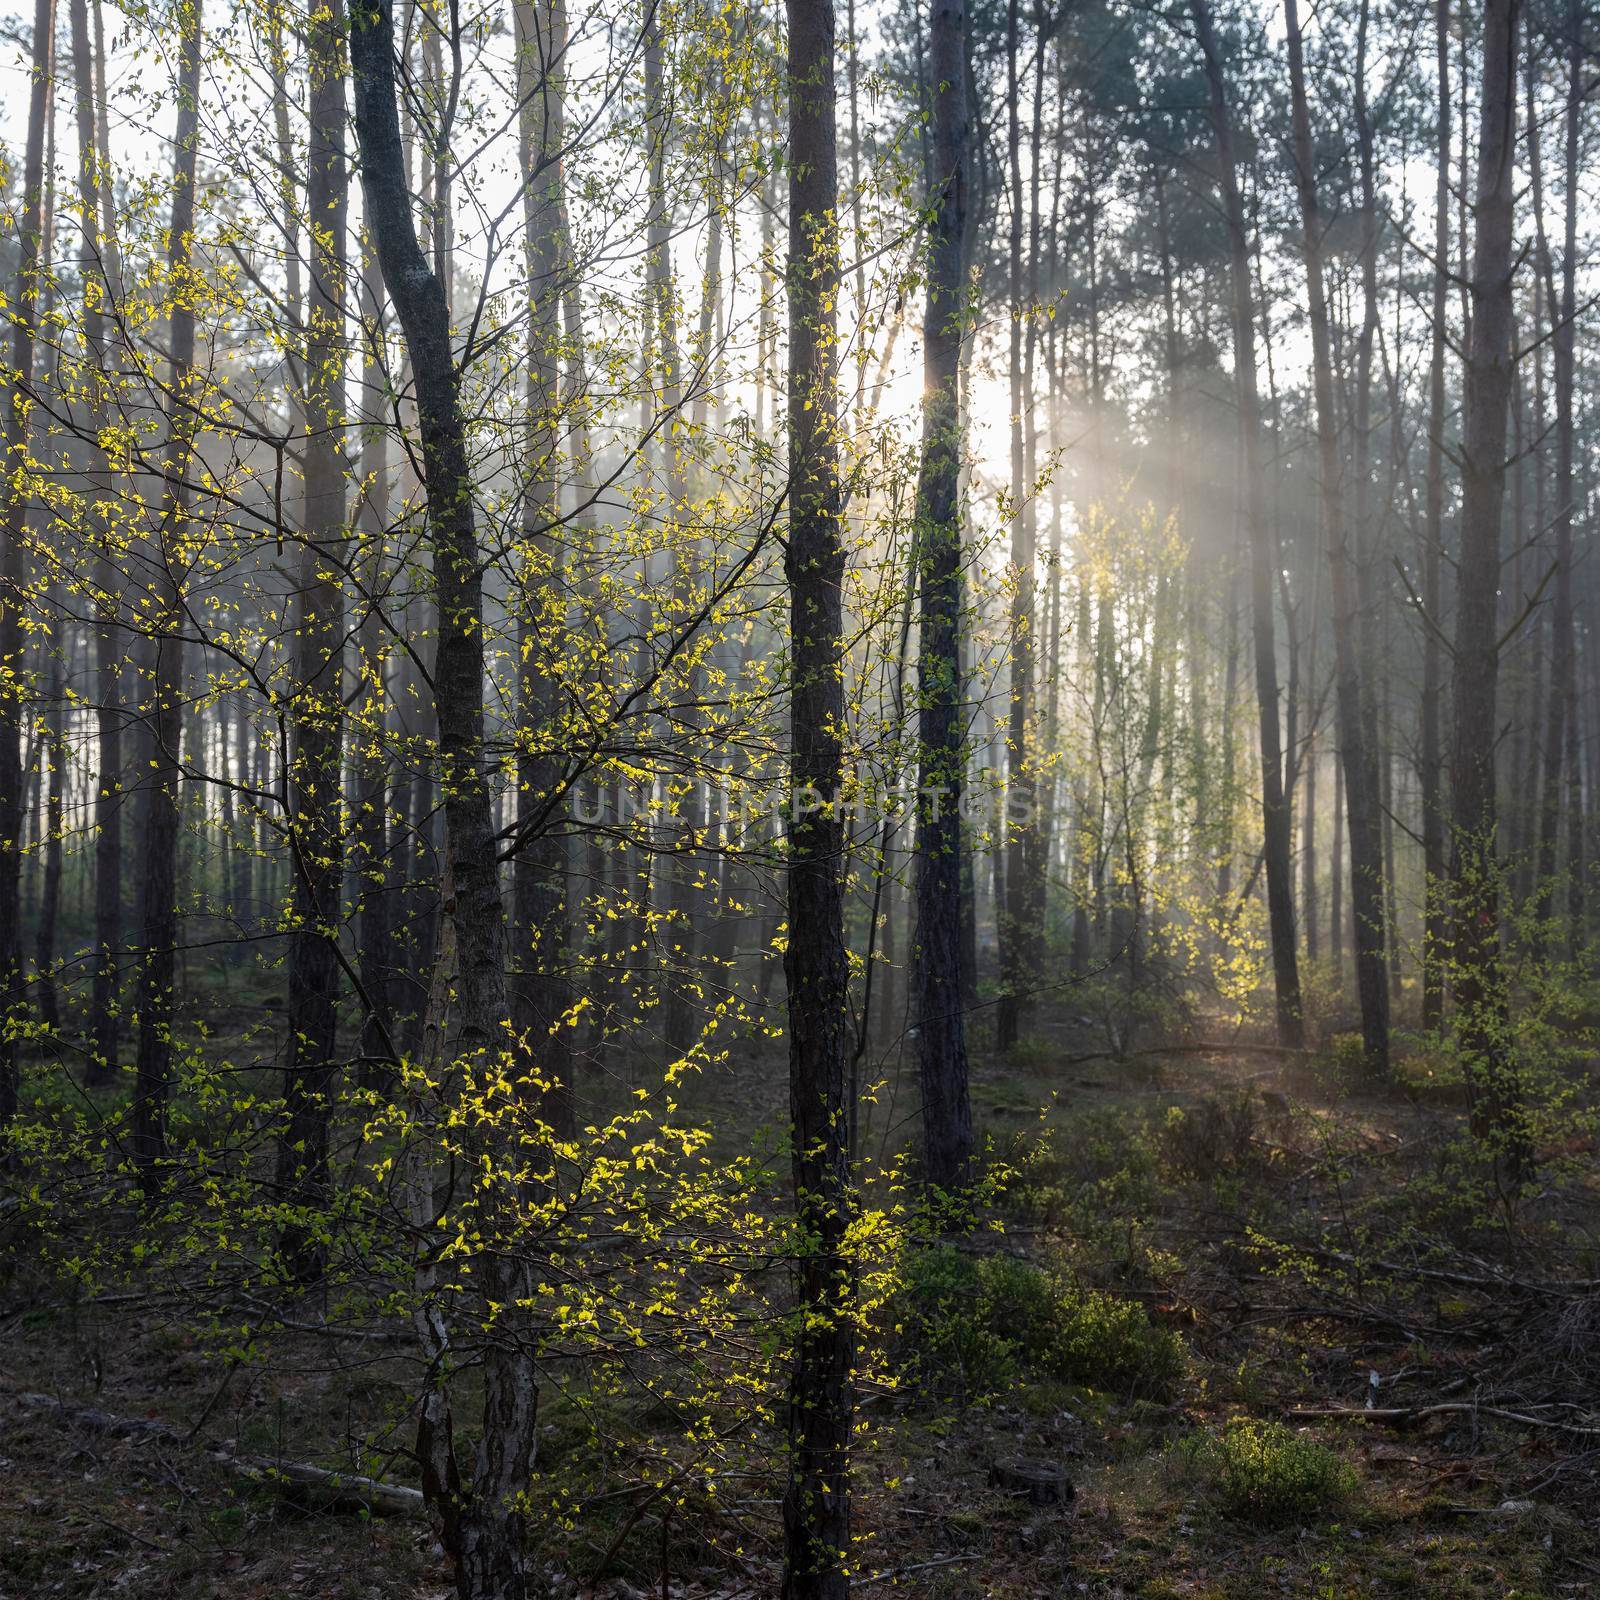 fresh birch leaves lit up in early morning sunshine beams between trunks of forest in spring